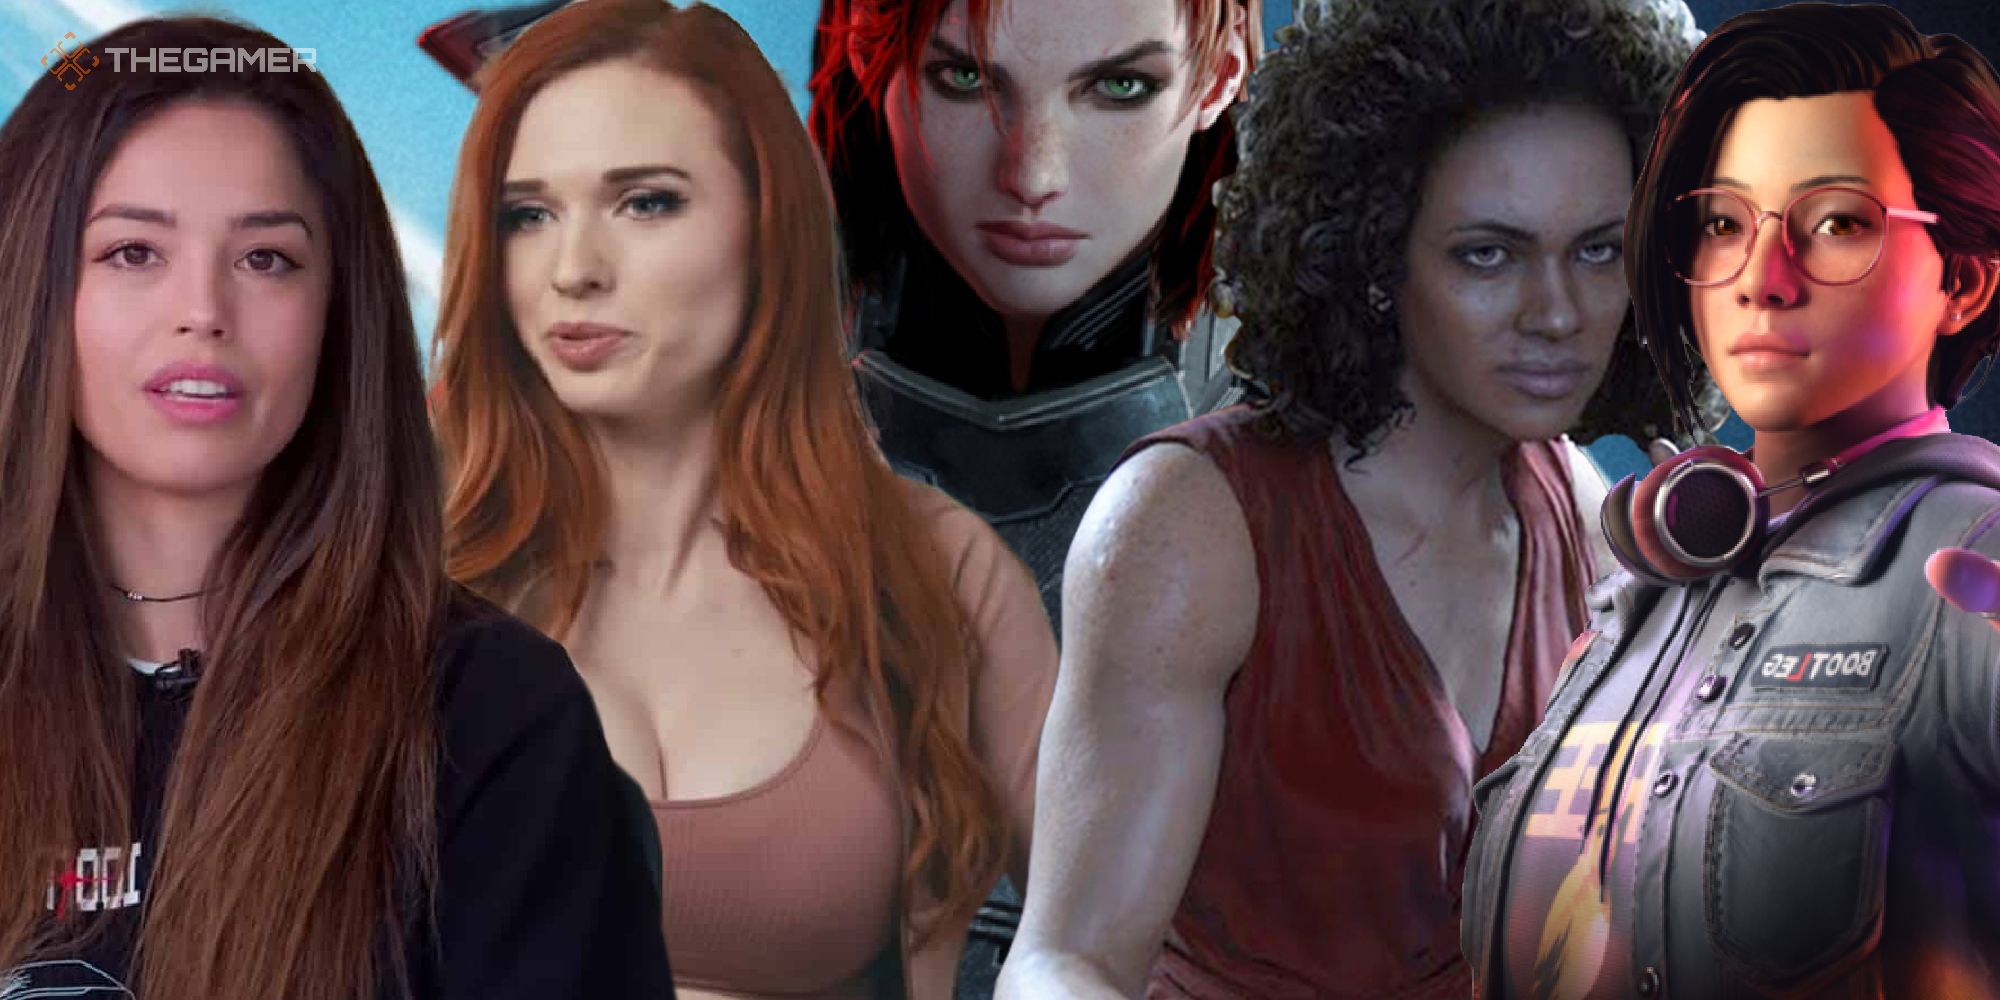 Women in games - valkyrae, amouranth, femshep, nadine ross, and alex from life is strange